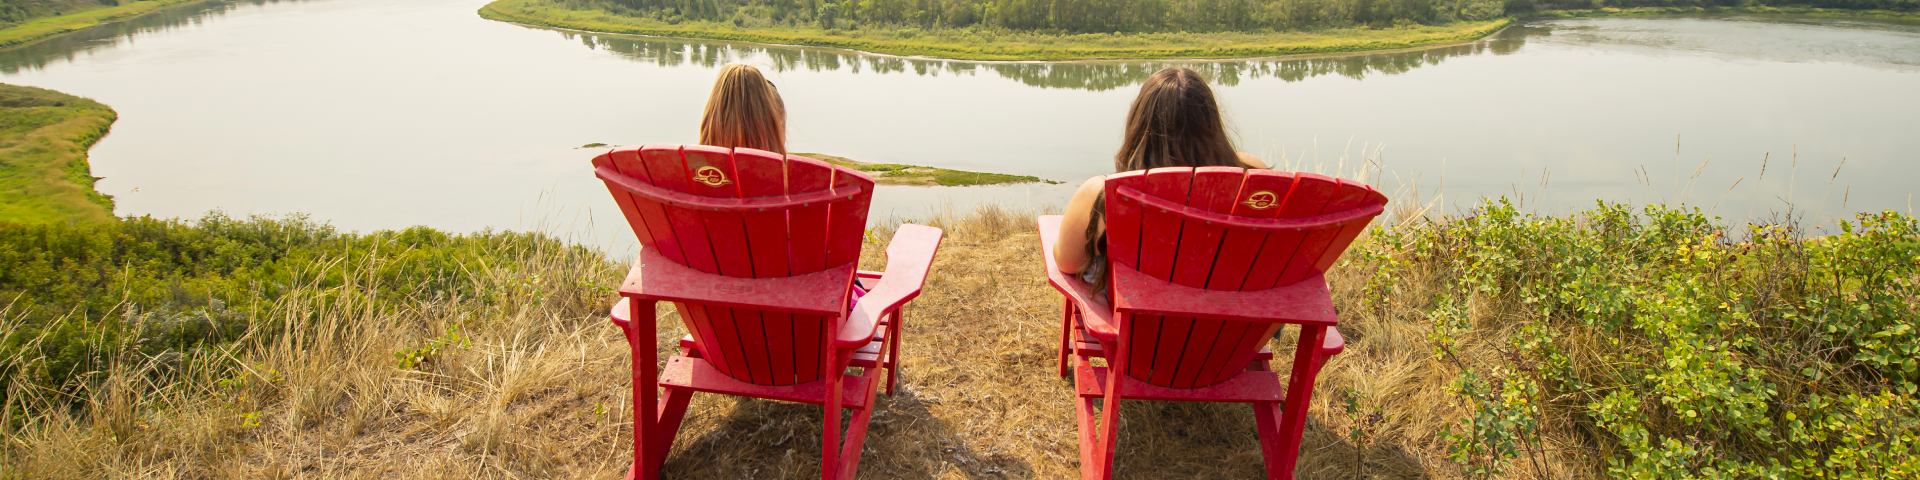 Two visitors sit Parks Canada red chairs overlooking the river